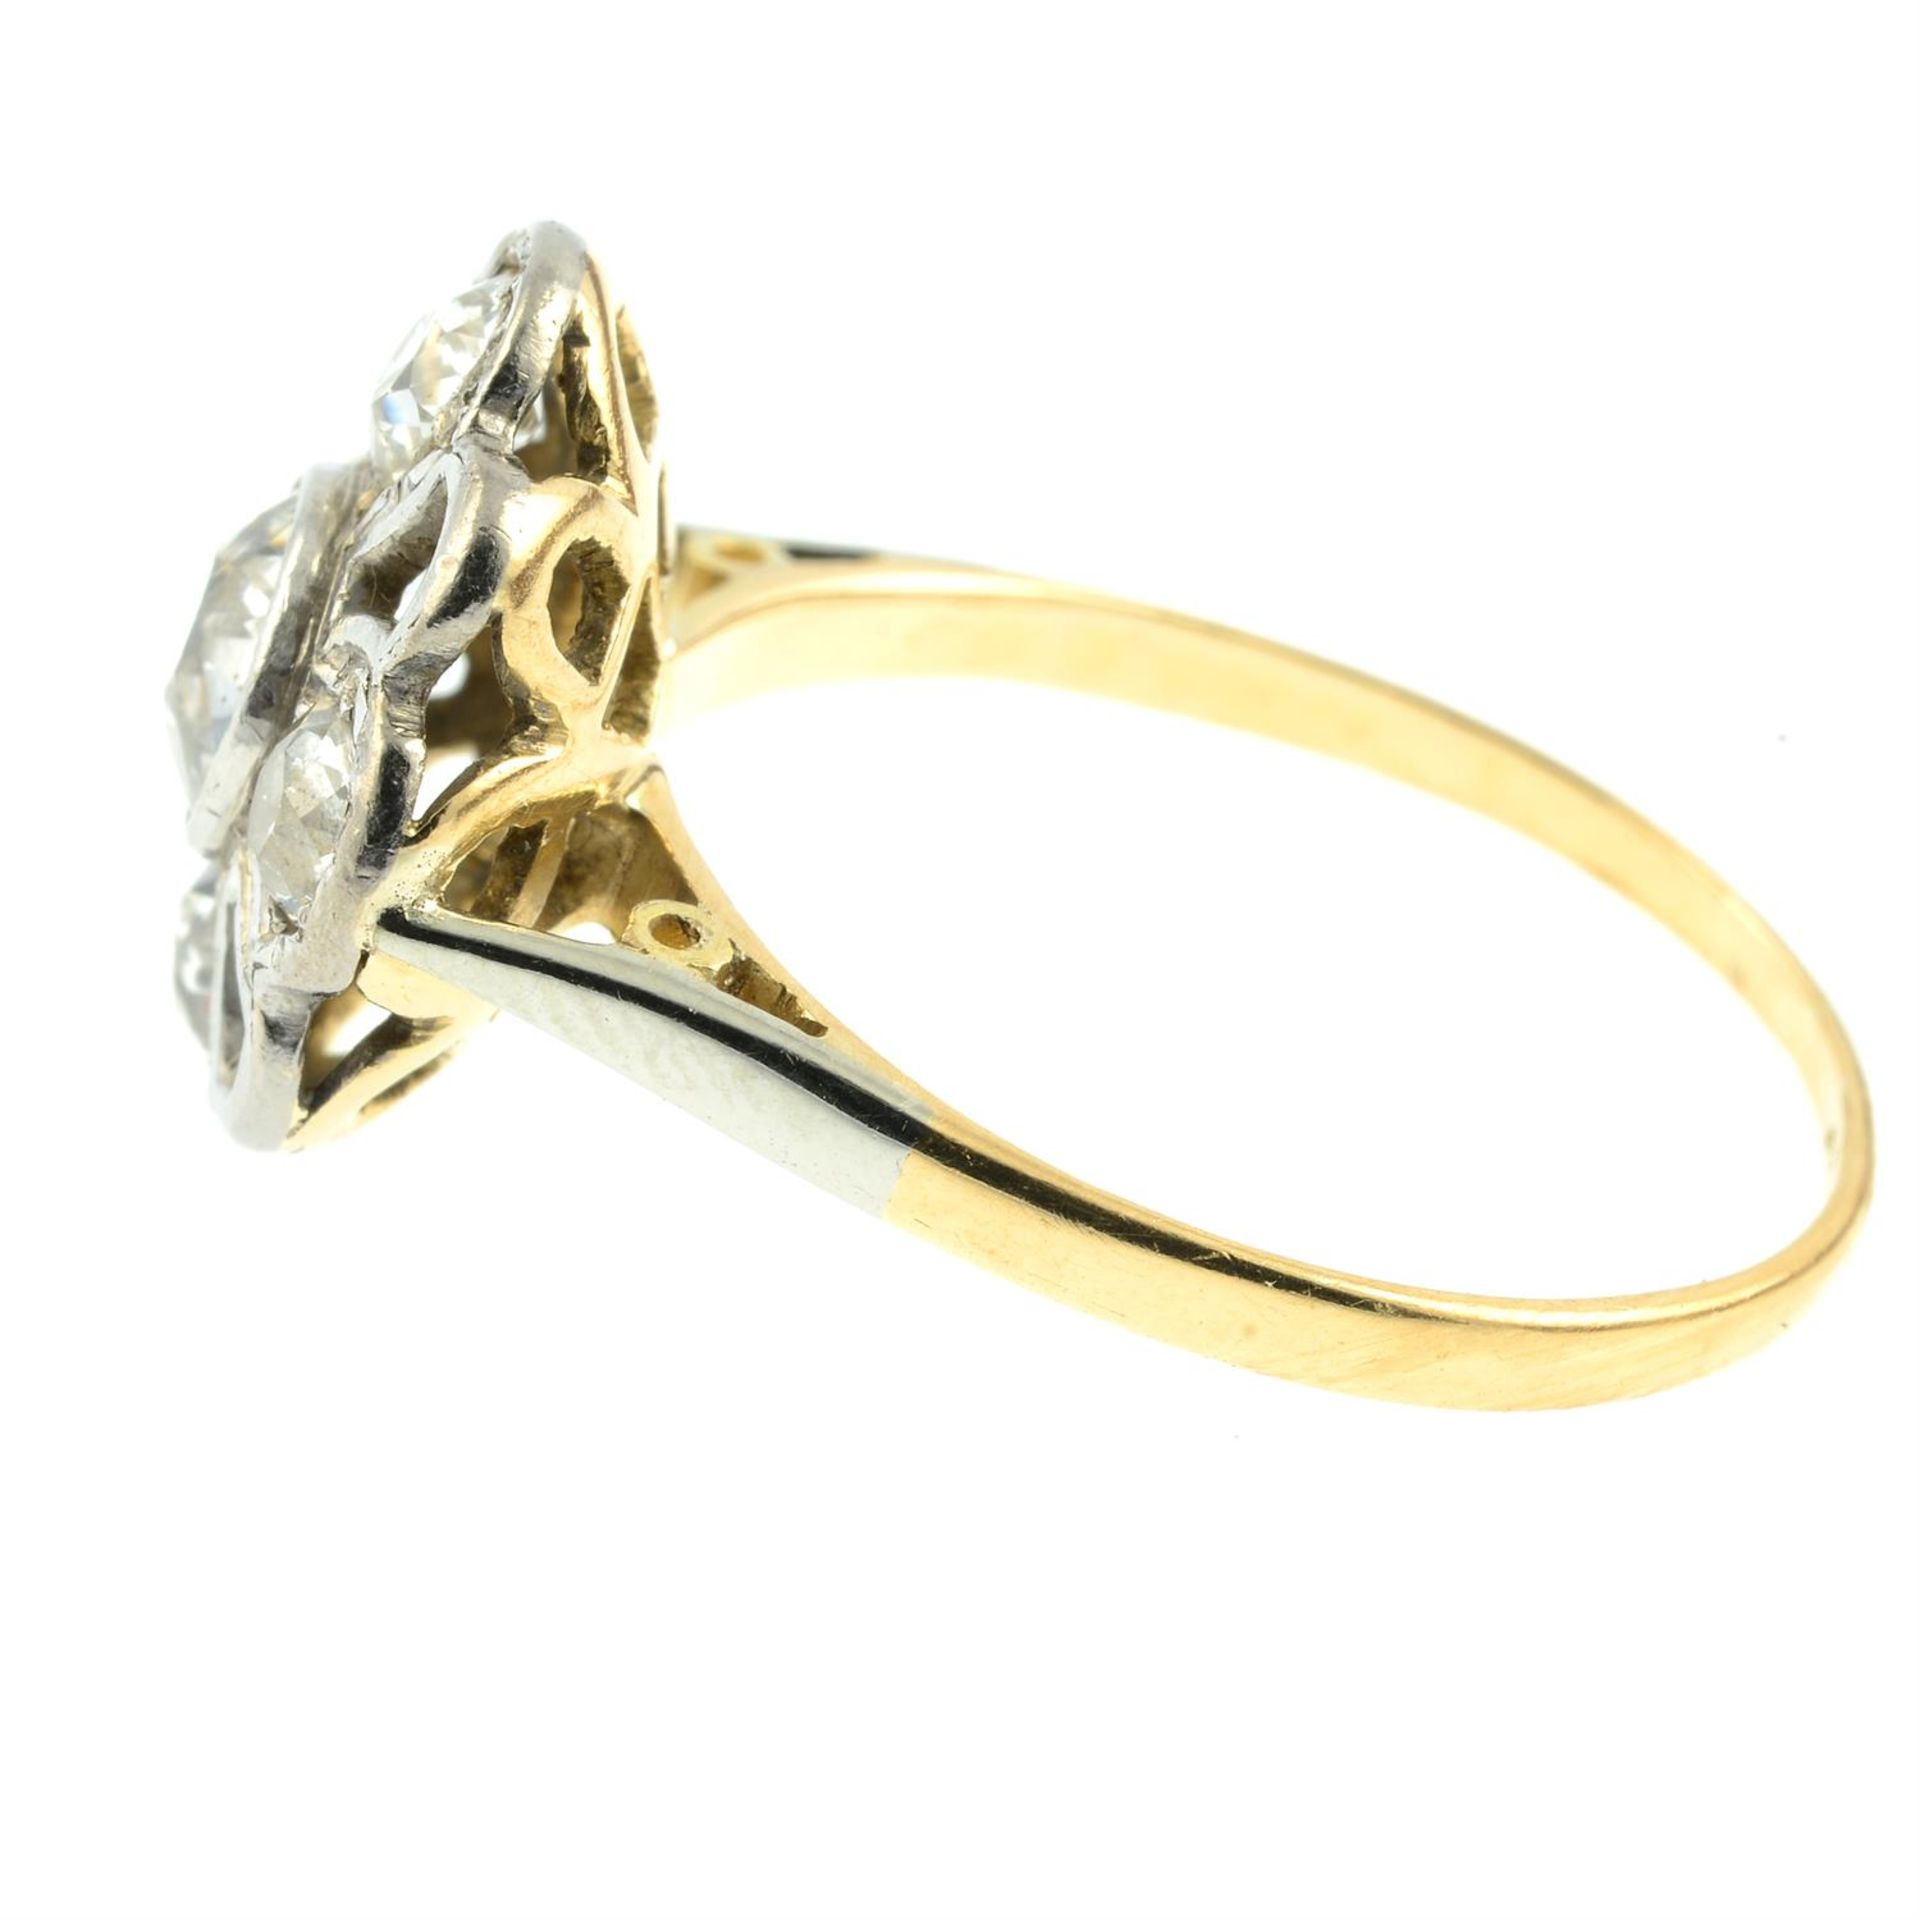 An early to mid 20th century platinum and 18ct gold old-cut diamond floral dress ring. - Image 3 of 5